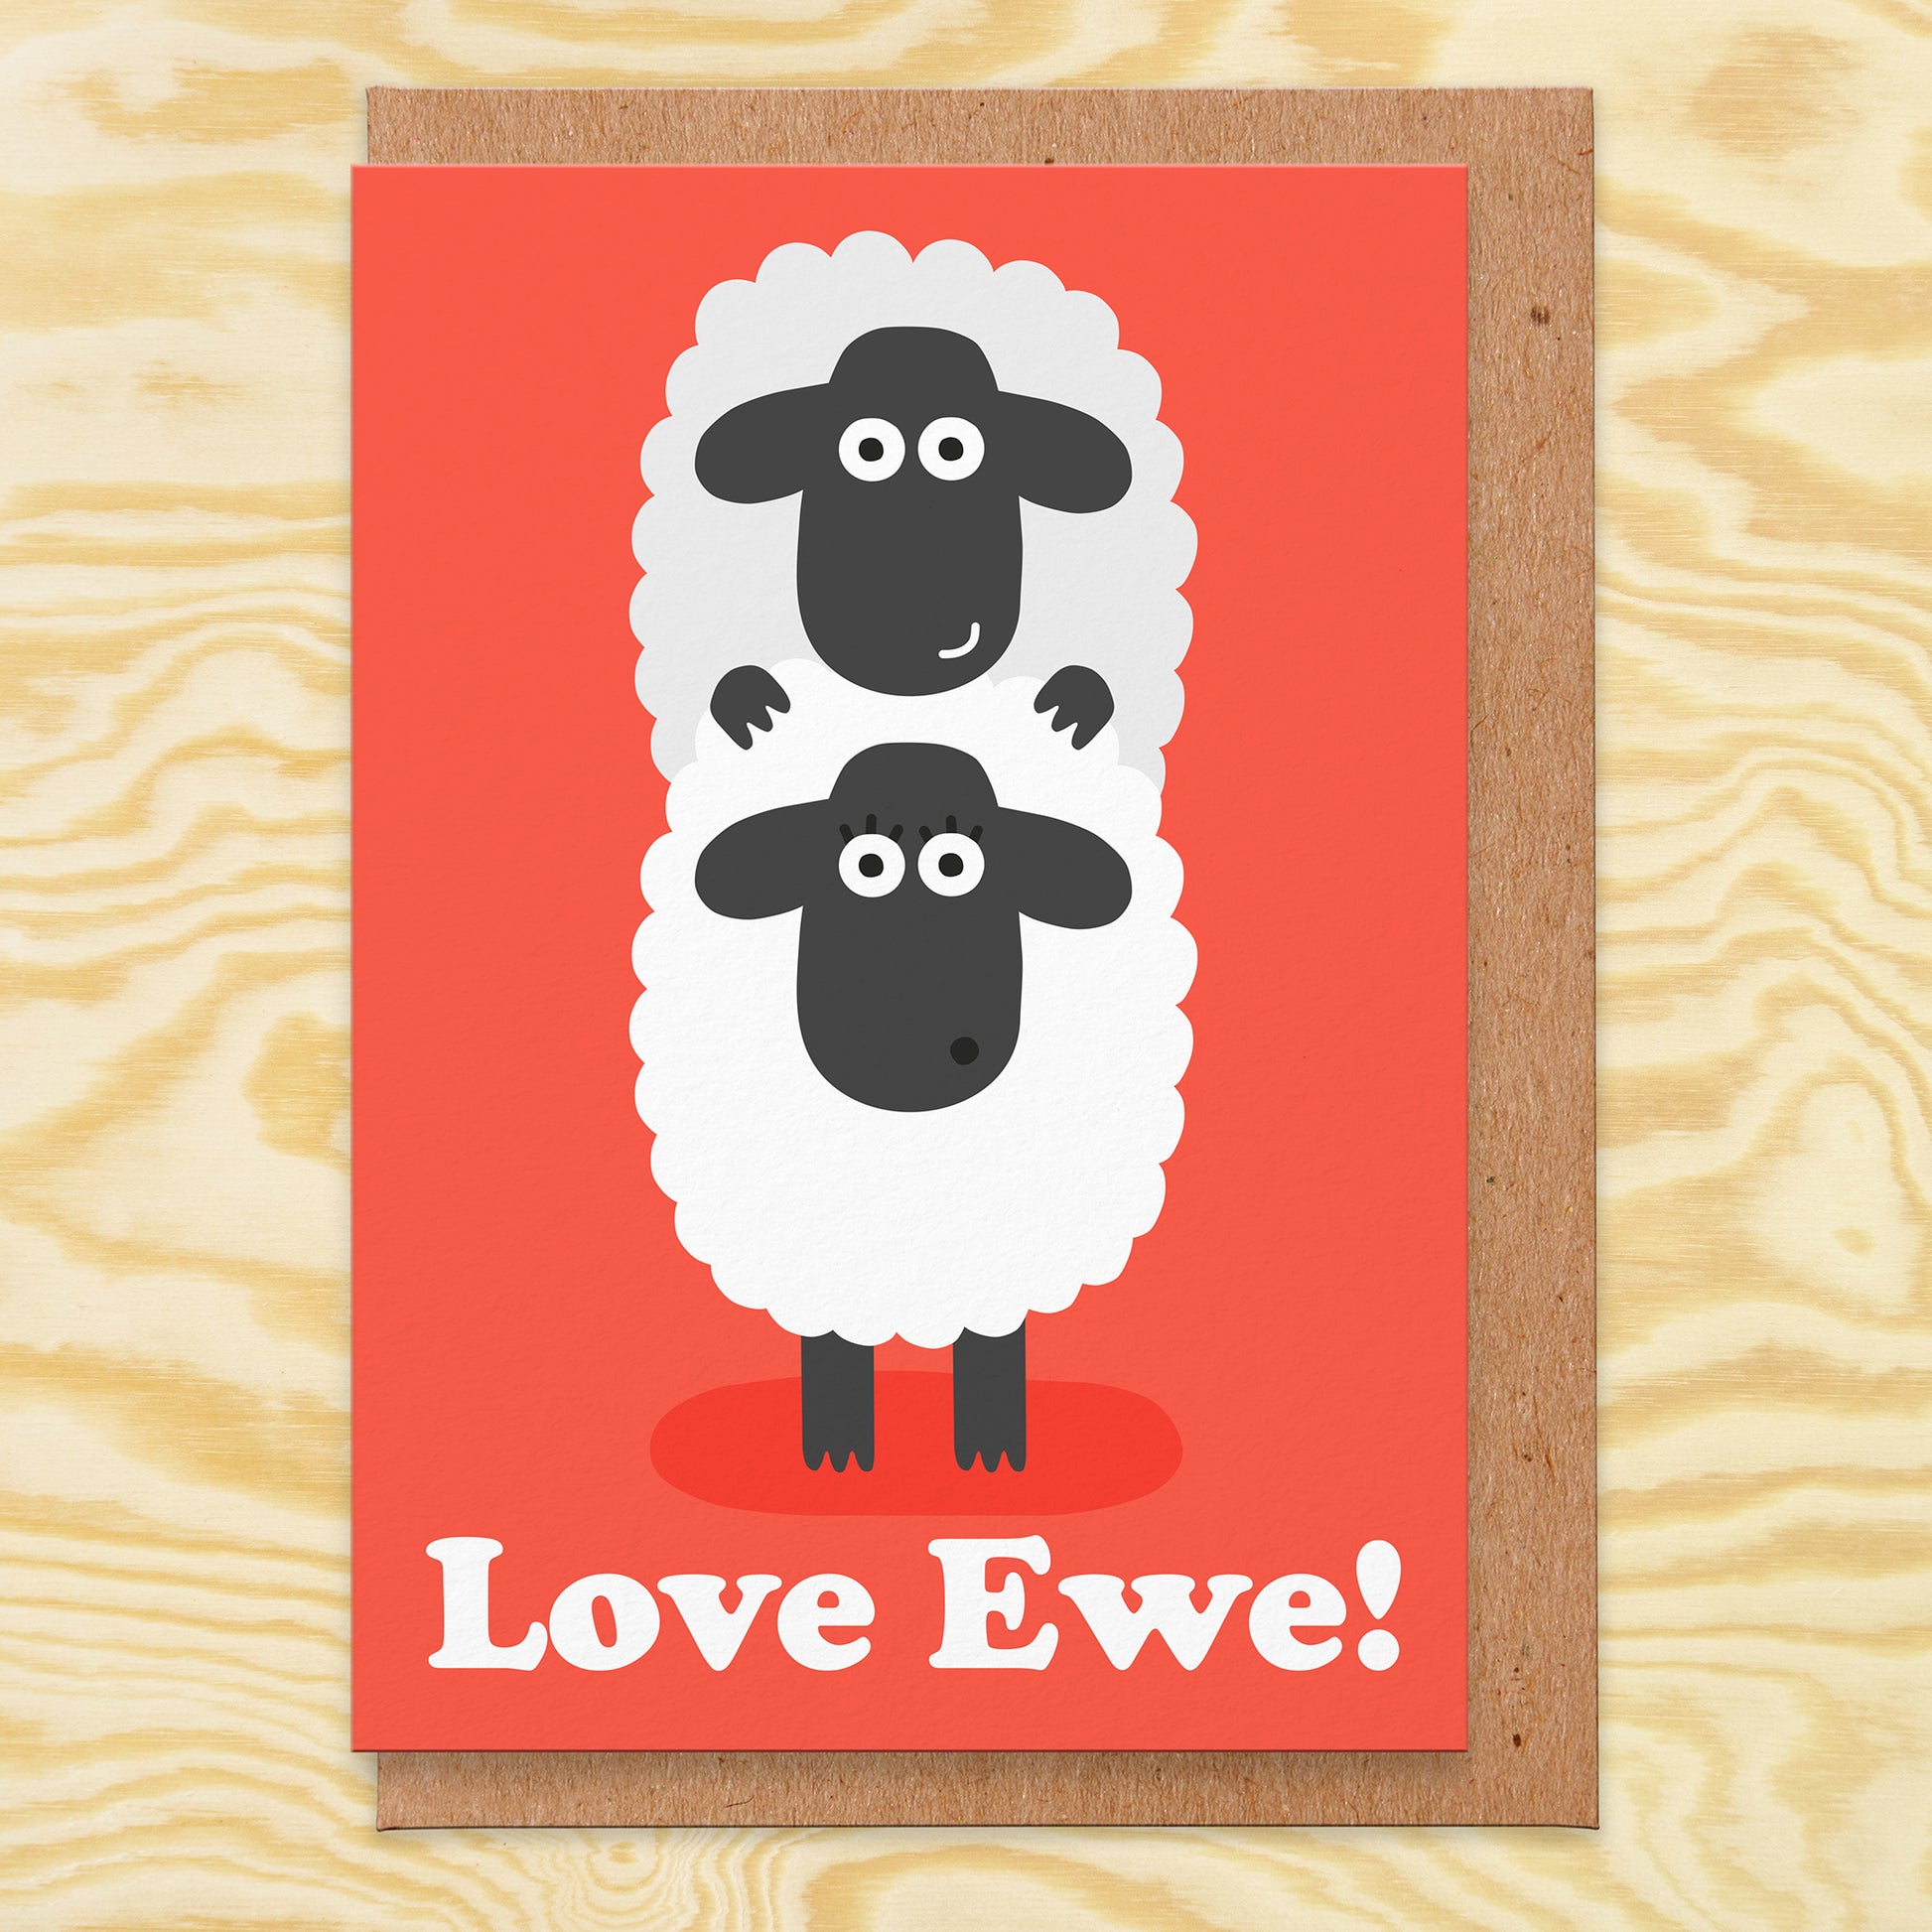 Love card with an illustration of two sheep on a red background and it reads love ewe!